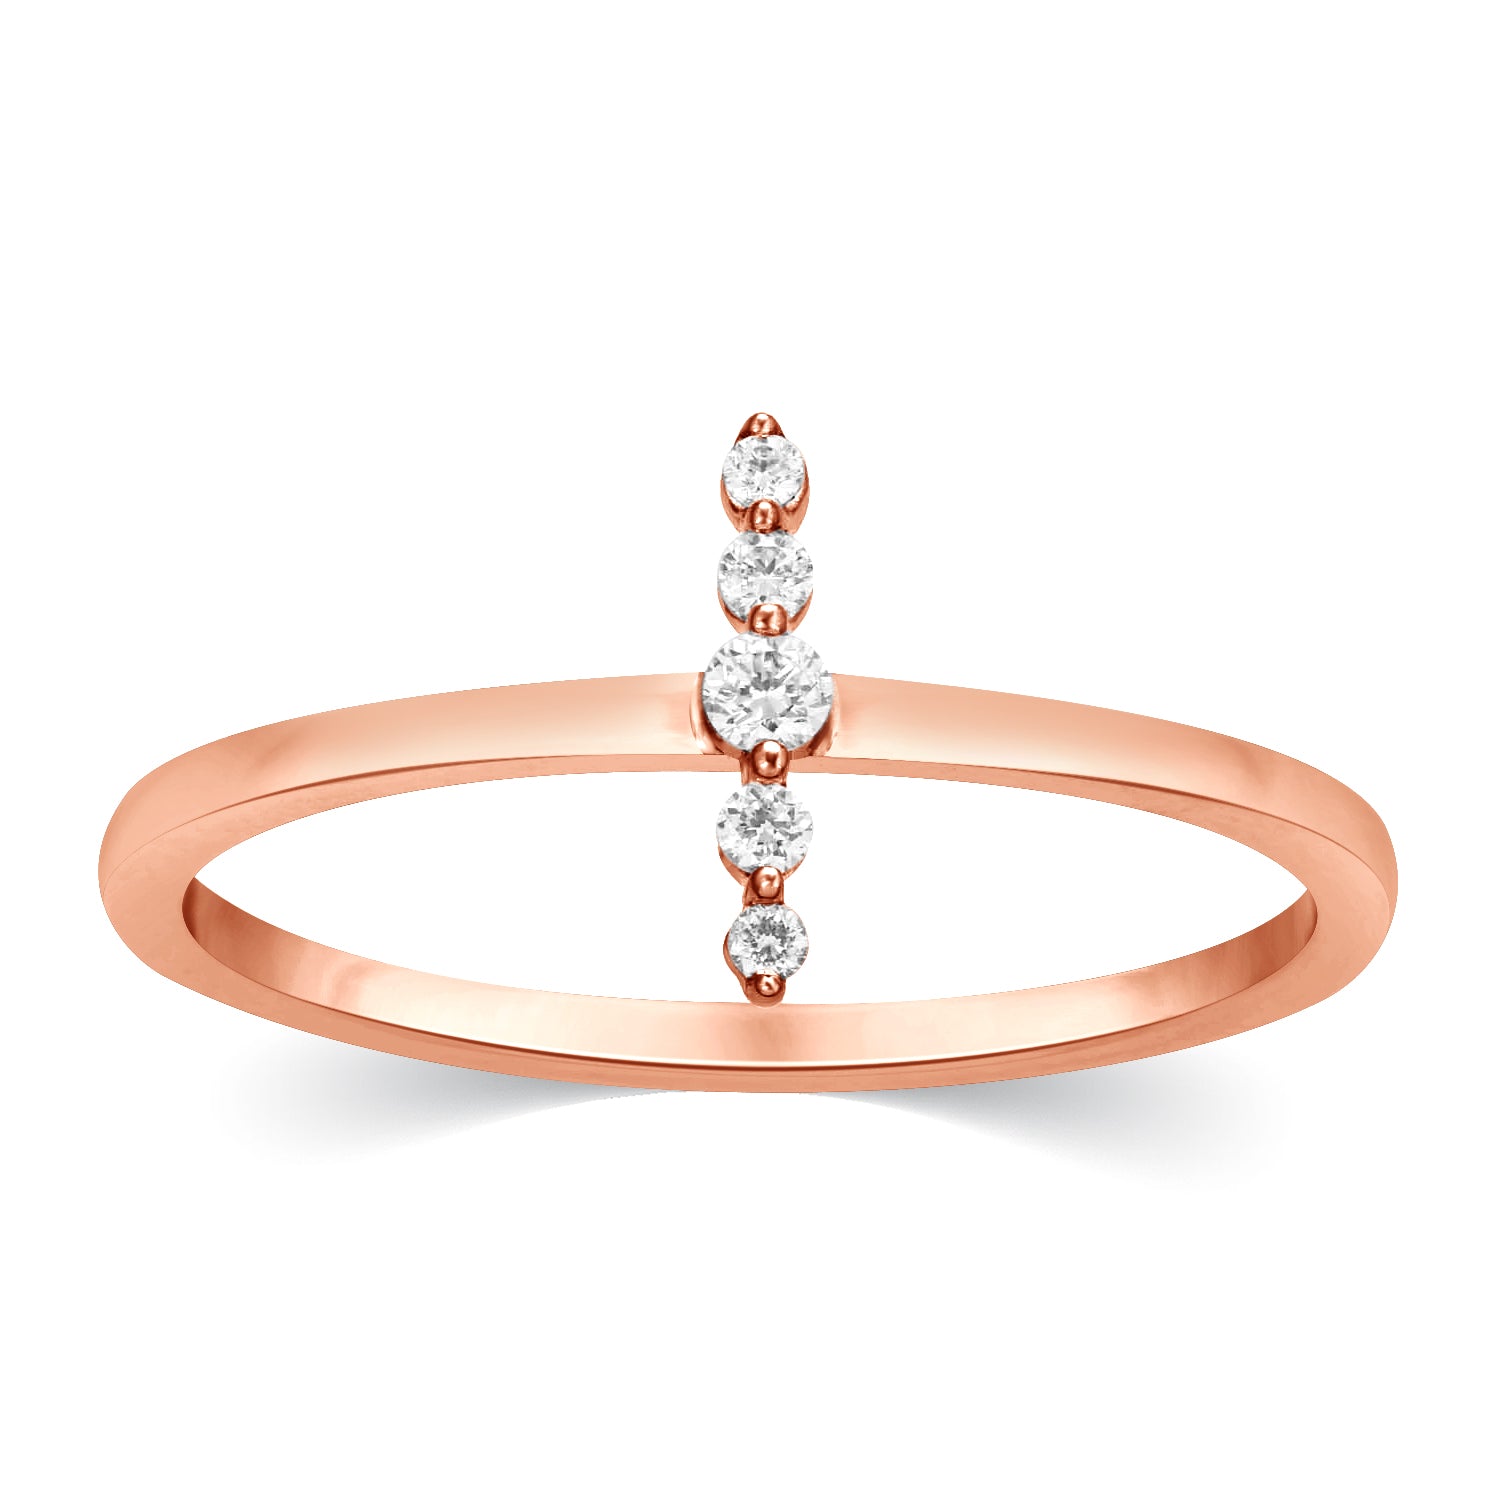 Wedding Band Ring With 0.06 Carat TW Of Diamonds In 10K Rose Gold